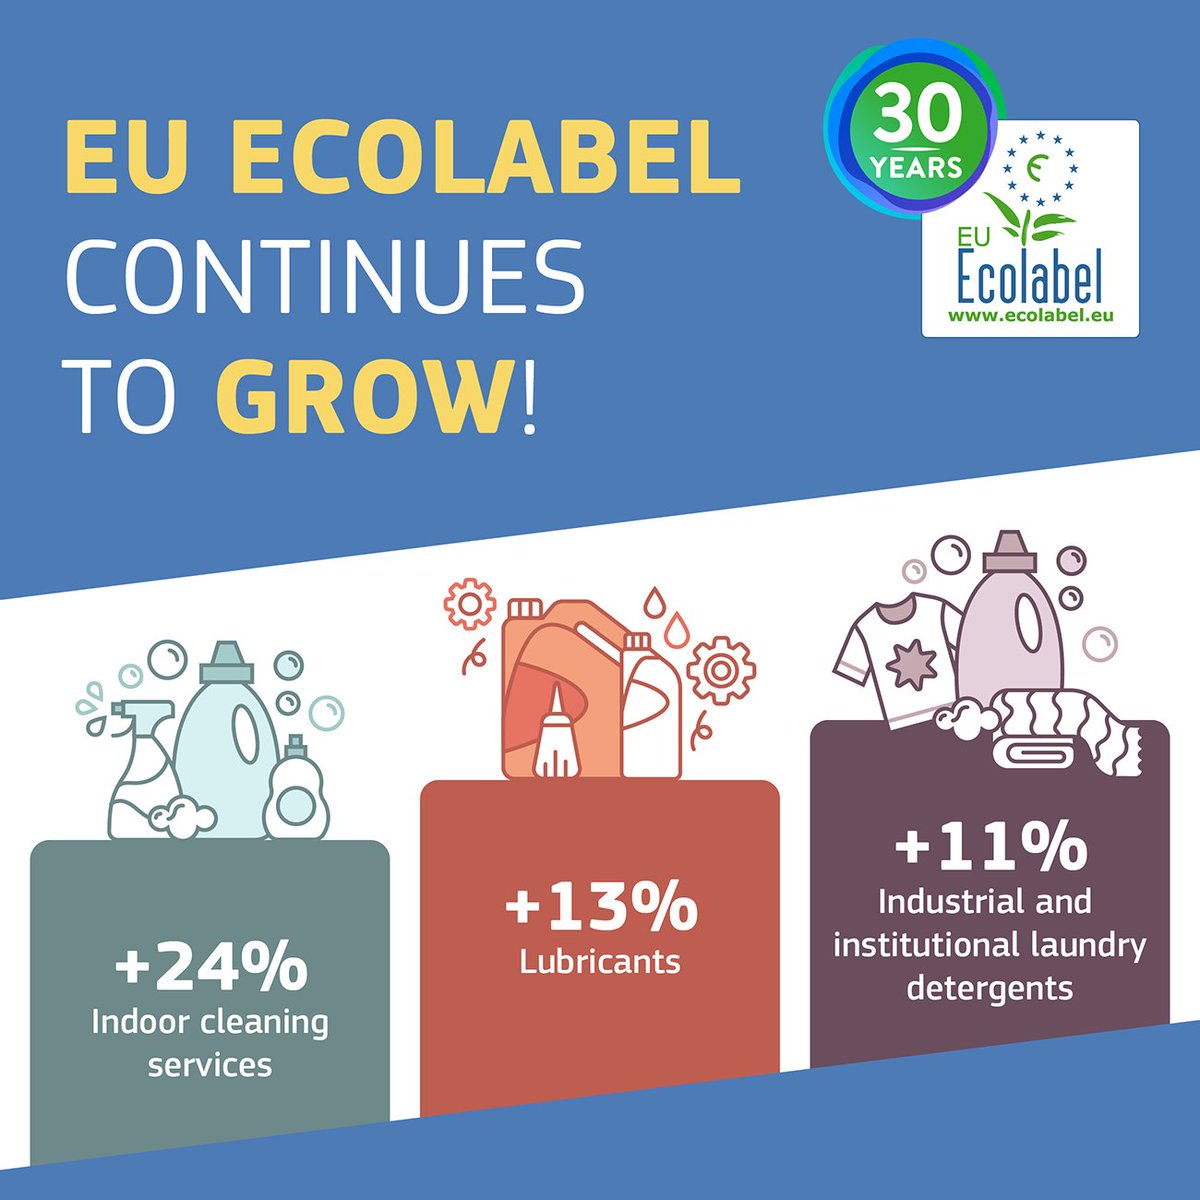 The #EUEcolabel continues to grow! 📈

On this #WorldEcolabelDay, discover the growing number of eco-friendly and sustainable products & services on the 🇪🇺 market - for a greener and more #CircularEconomy 

Check out the latest facts and figures 👉 environment.ec.europa.eu/topics/circula…